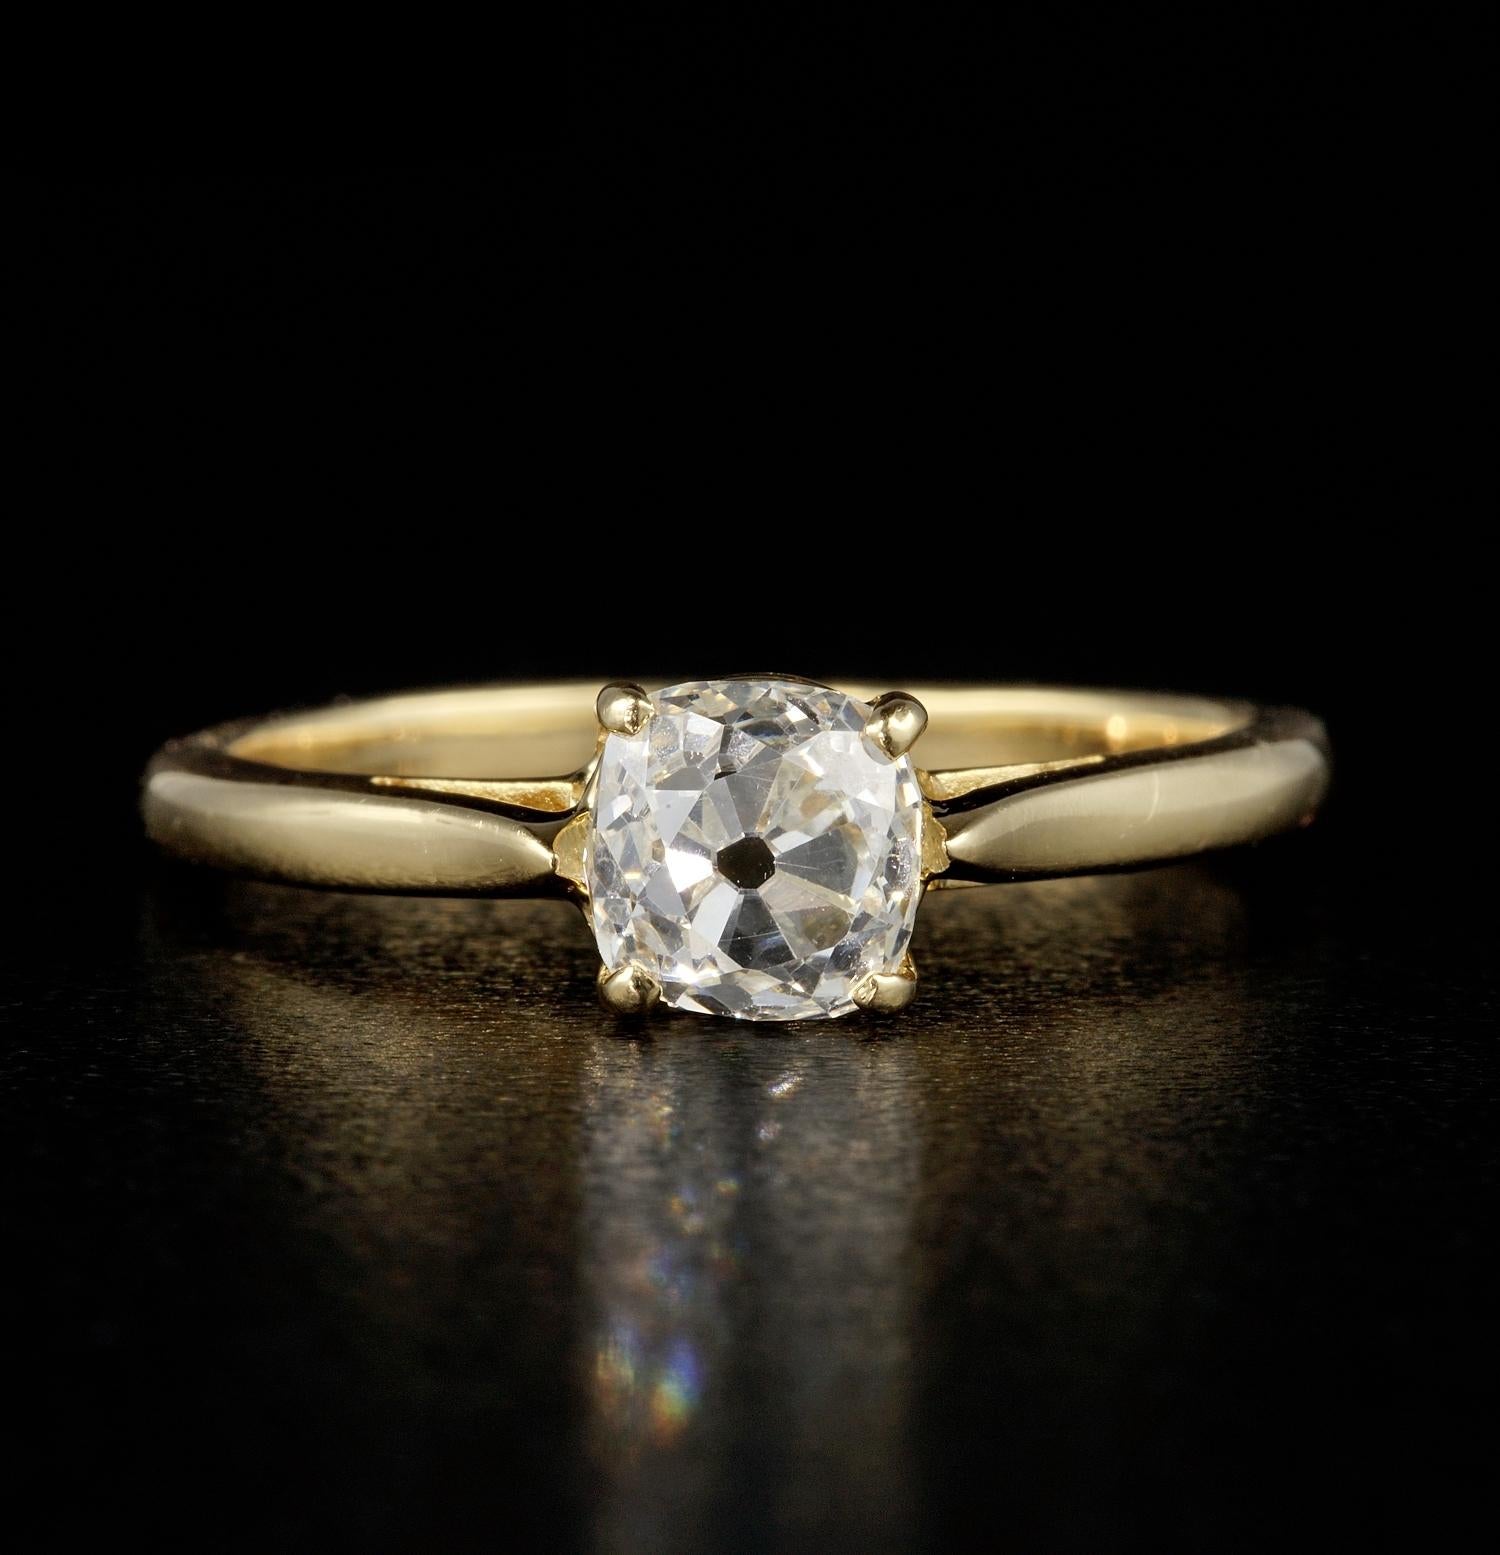 A striking authentic Victorian Diamond solitaire ring dating 1900 ca

The star is a bright white scintillating old mine Cushion cut Diamond 1.15 Ct in weight – rare grade of G H VVS – the very best in terms of colour clarity speaks for itself for